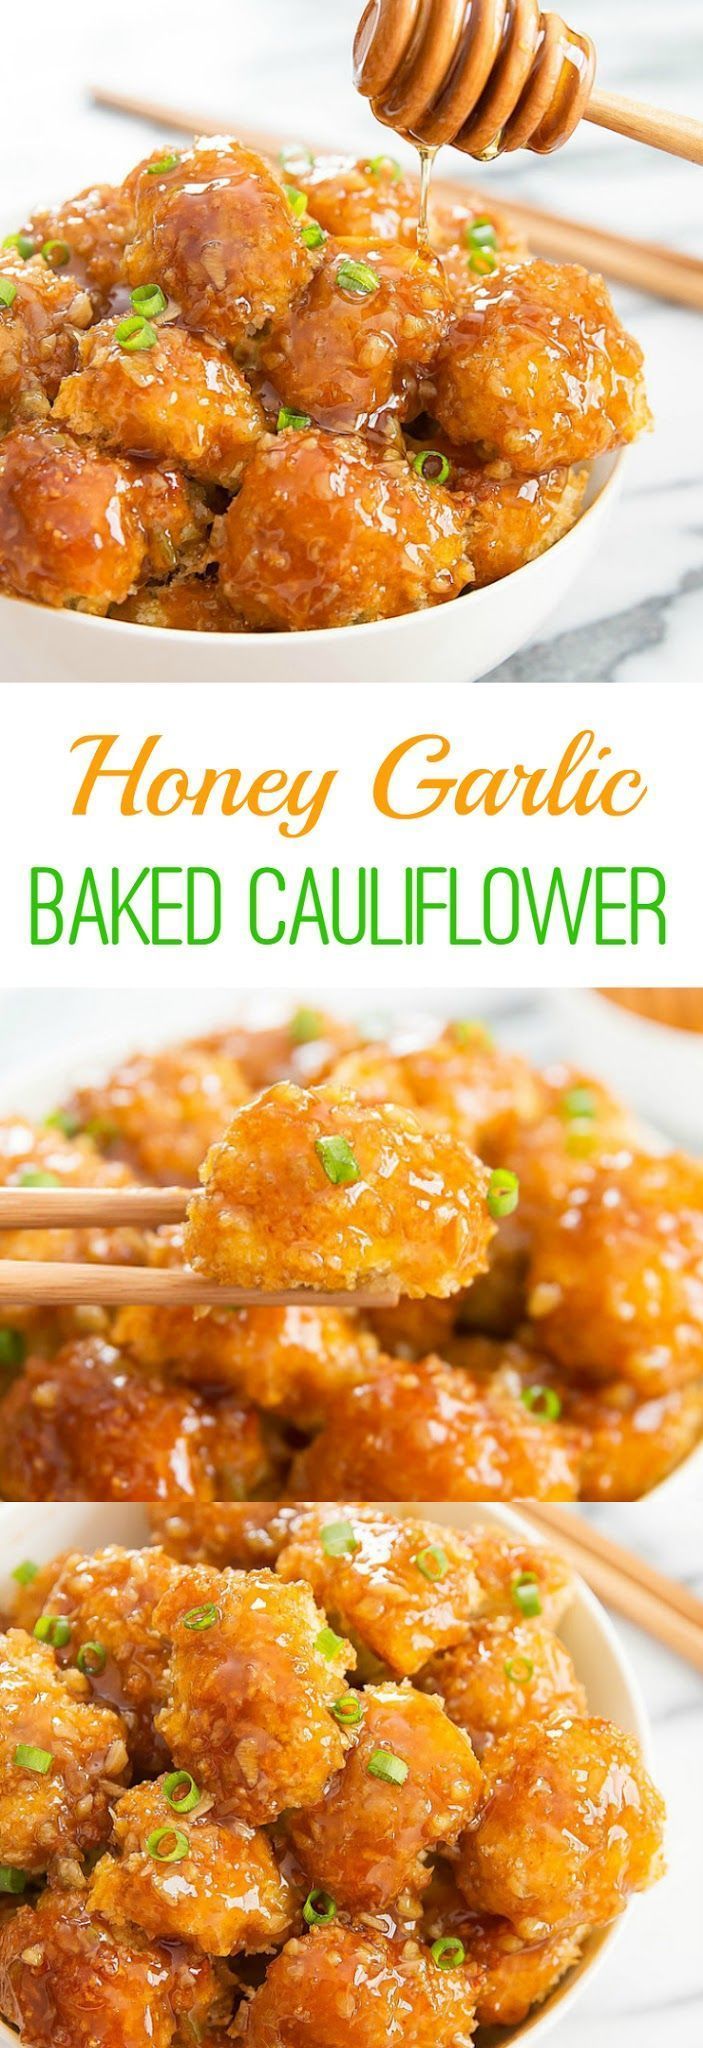 Honey Garlic Baked Cauliflower. An easy and delicious weeknight meal! – I can’t